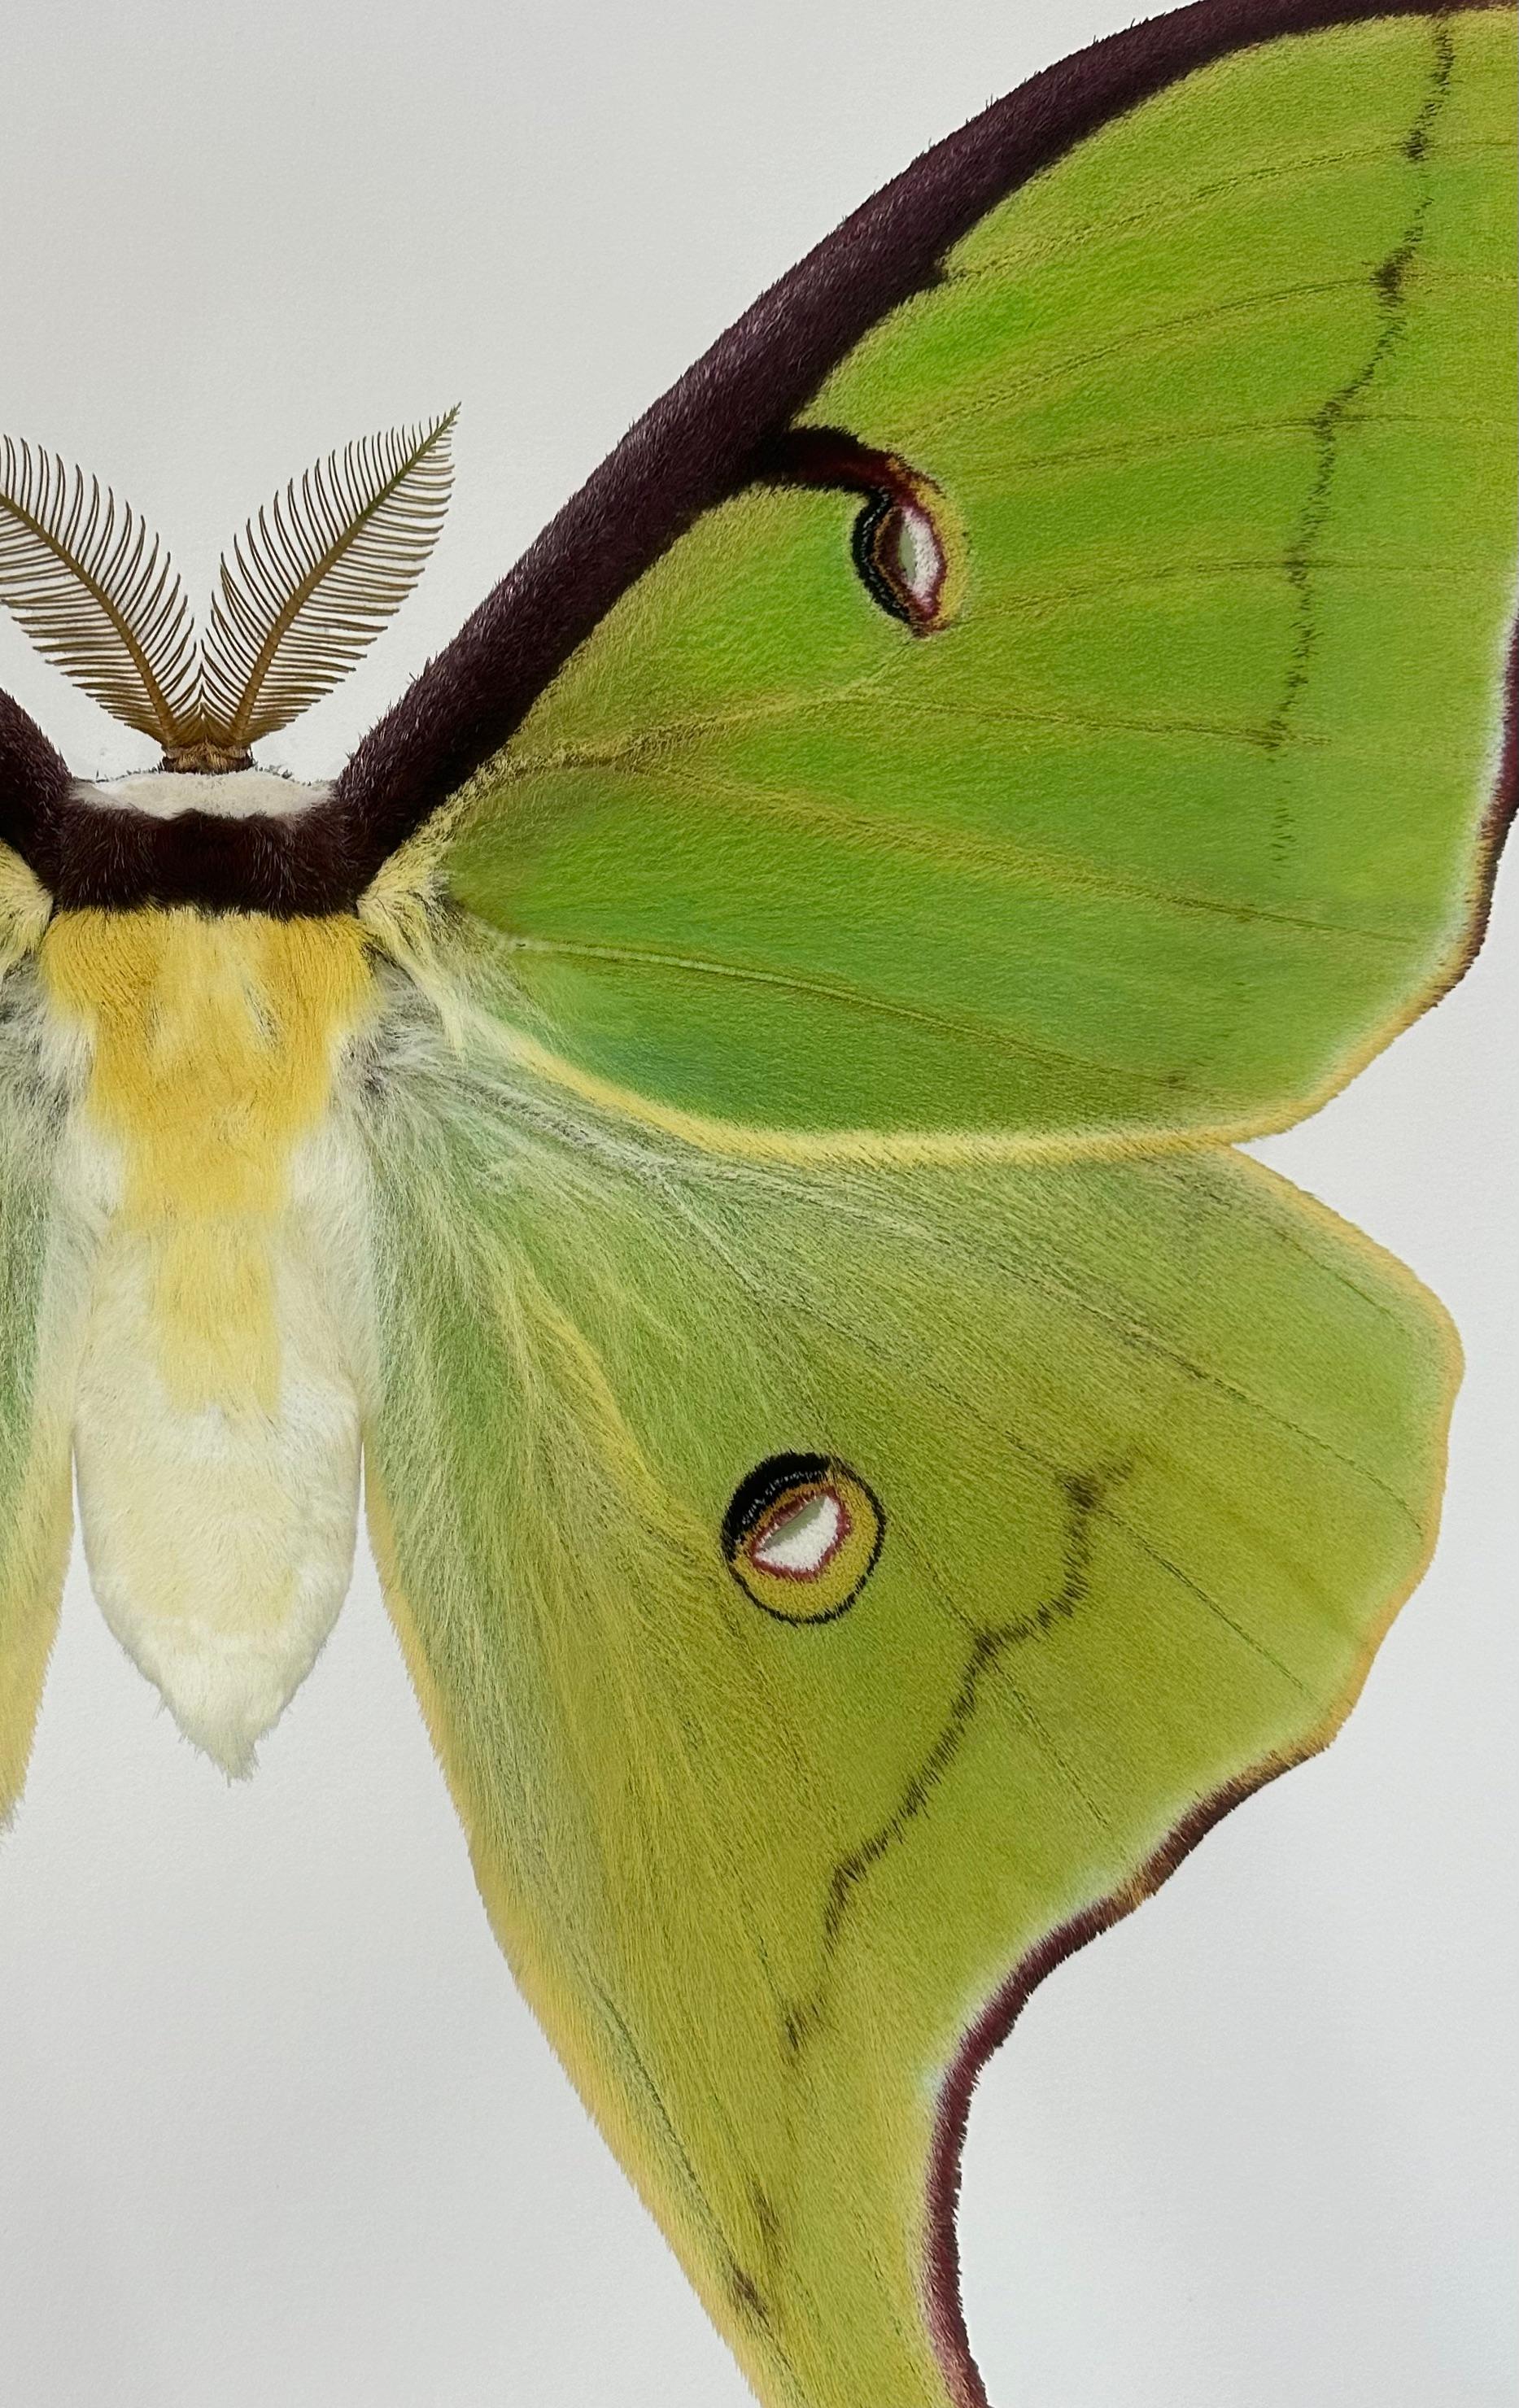 Actias Luna, Green, Yellow, Brown Moth Insect Nature Photograph For Sale 6